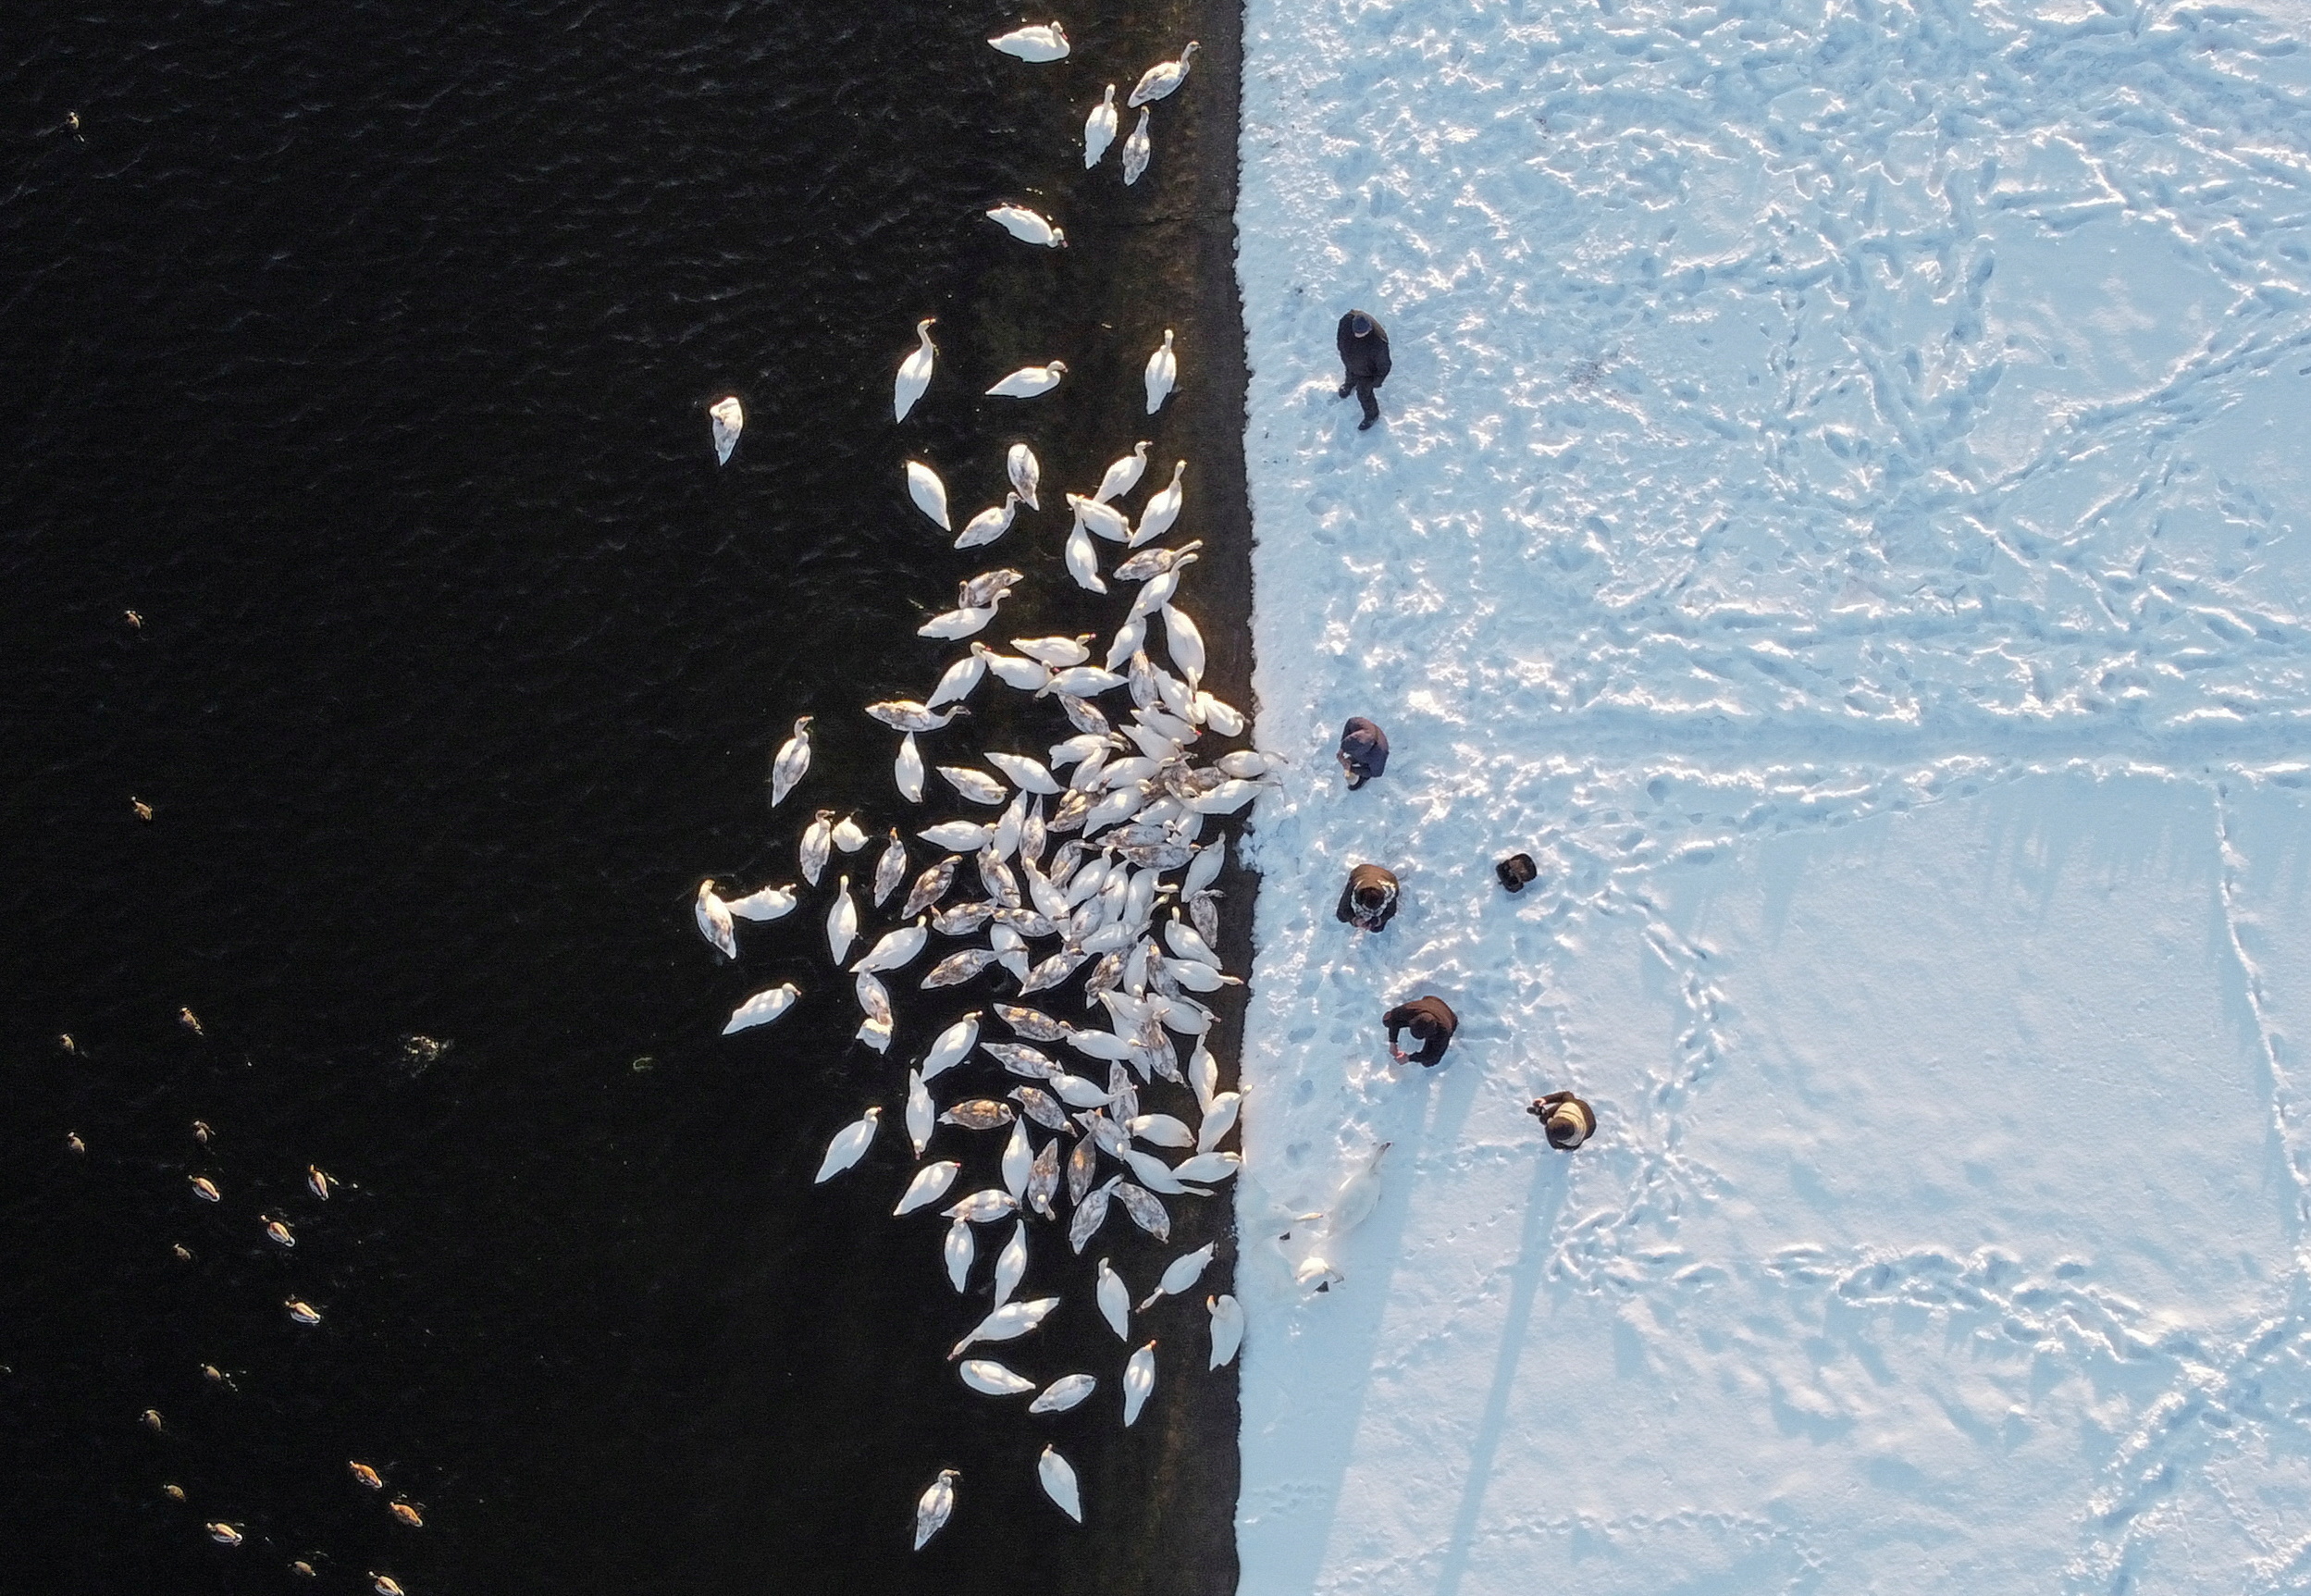 People feed swans on the bank of a water reservoir of the Khmelnytskyi Nuclear Power Plant (KhNPP) near the town of Ostroh, Ukraine February 16, 2021. The reservoir, which turned into a local tourist spot, attracts dozens of swans every winter as it never freezes over due to the warm waters discharged from the plant. Picture taken with a drone February 16, 2021. REUTERS/Valentyn Ogirenko TPX IMAGES OF THE DAY